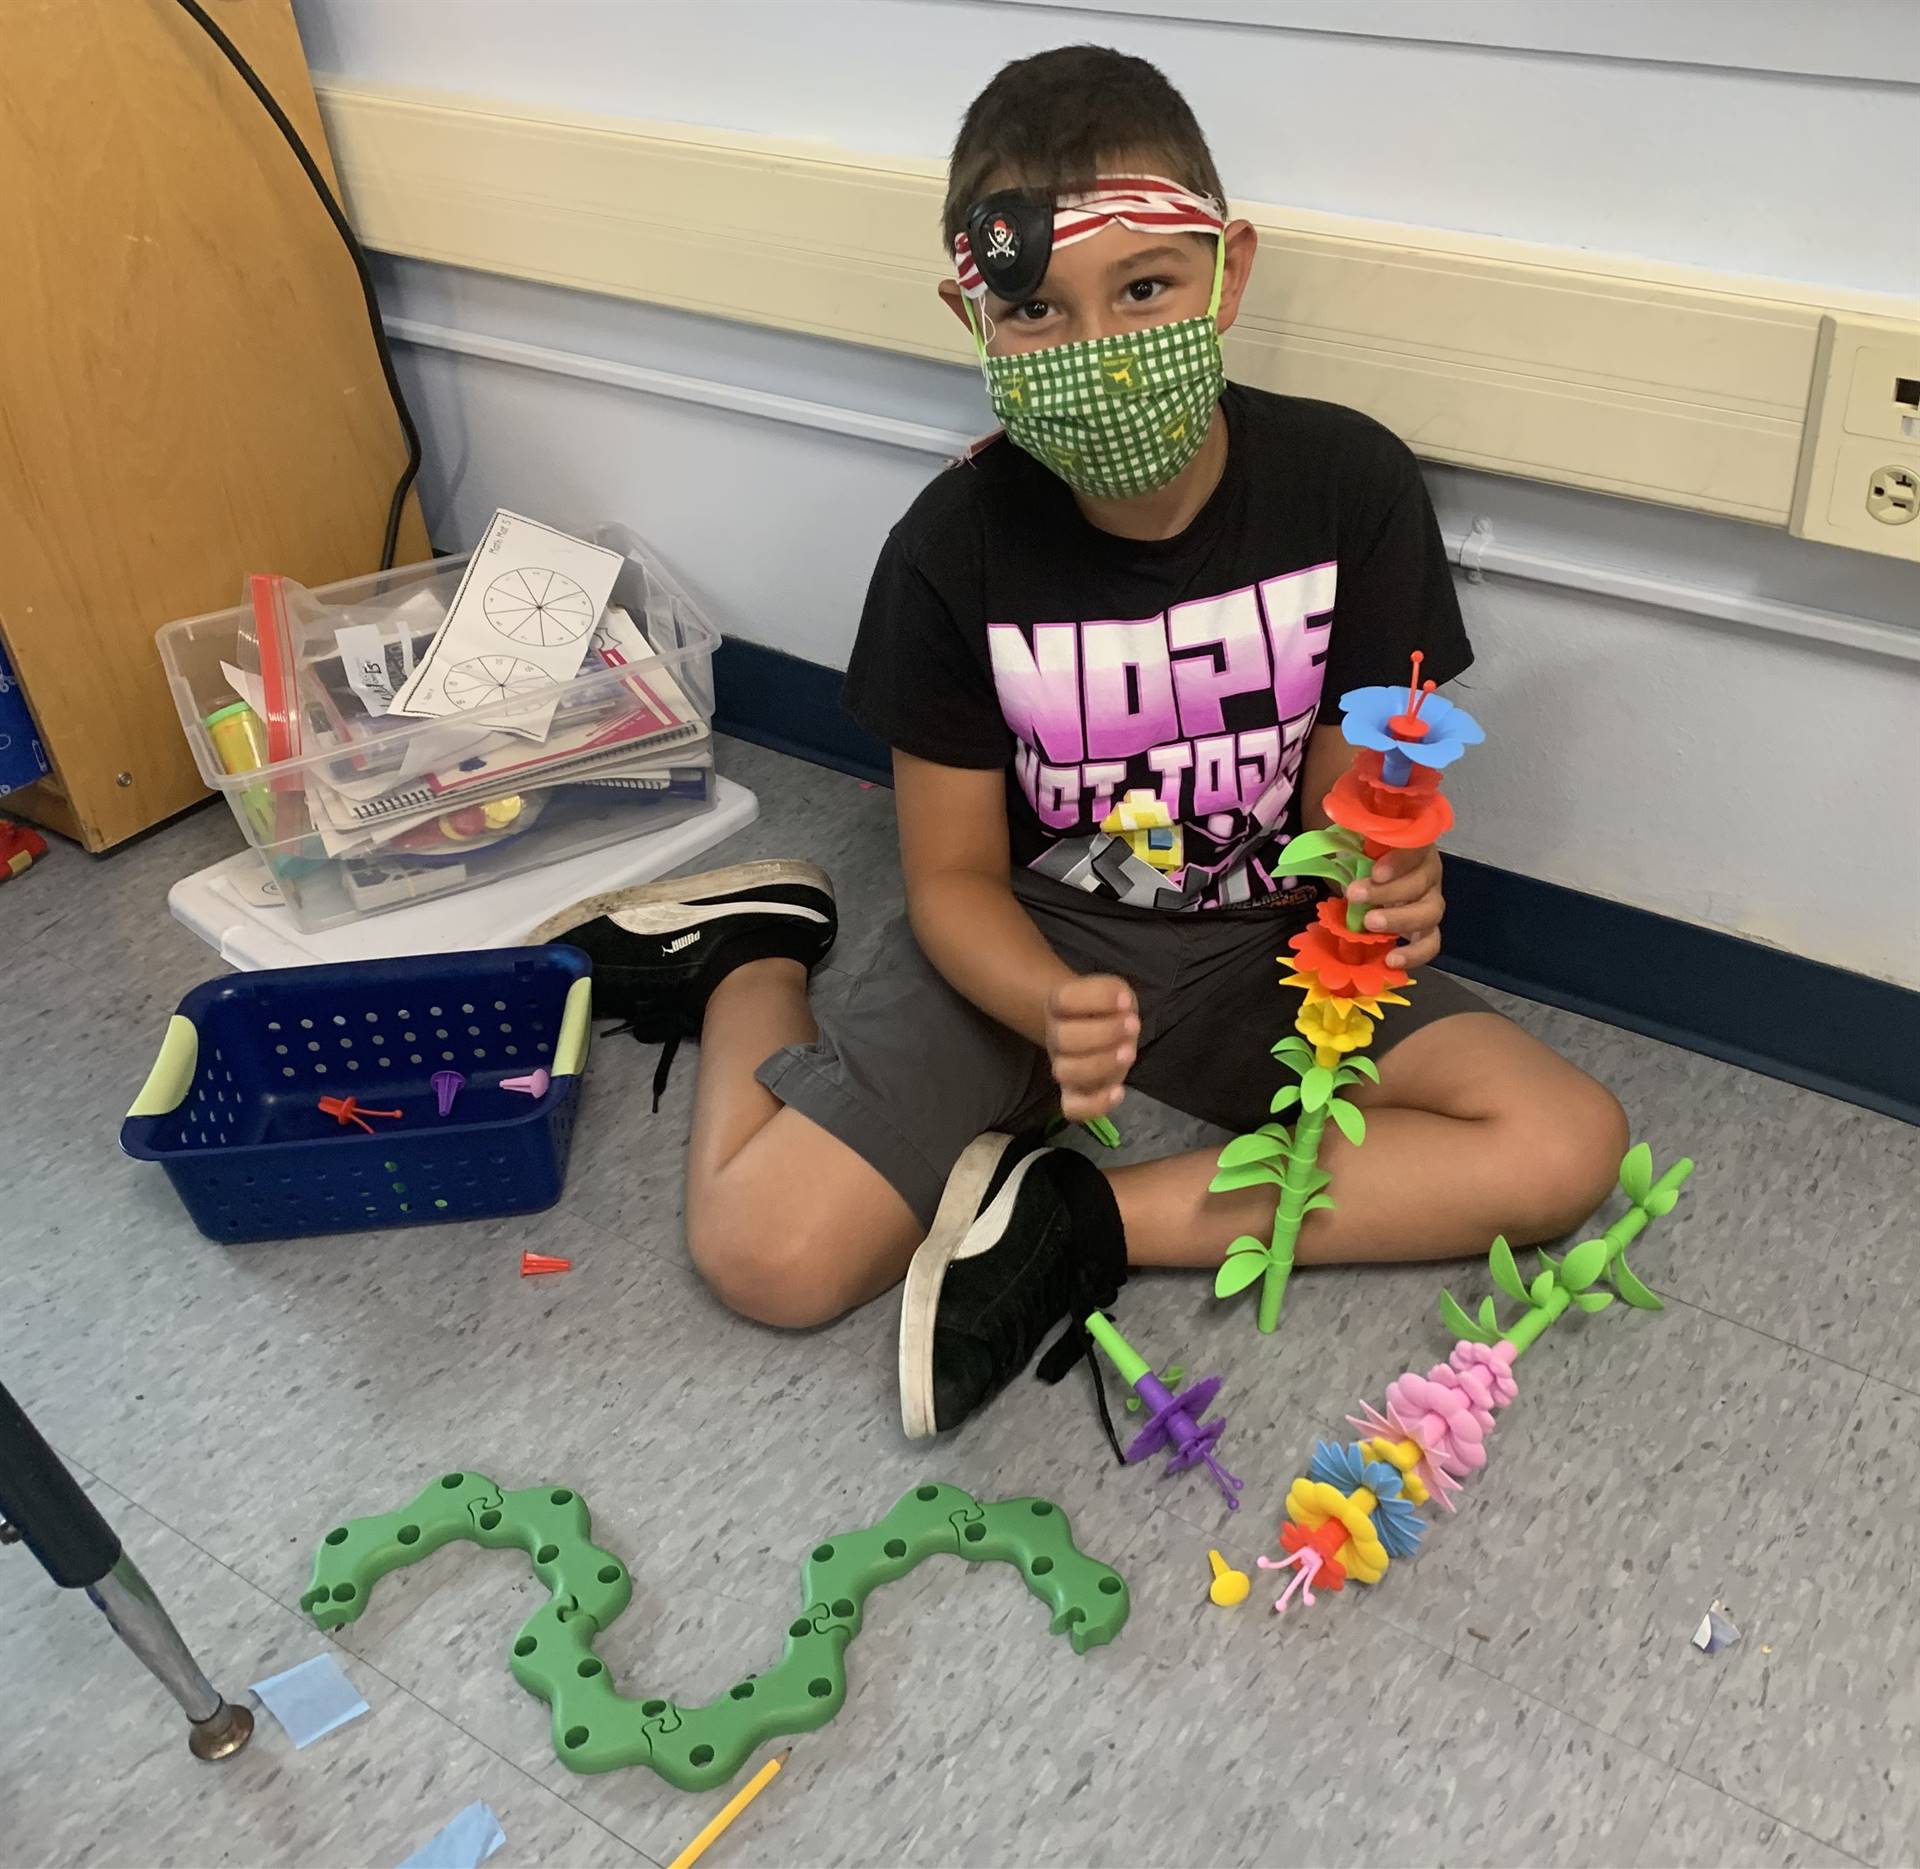  a student pirate builds with toys.